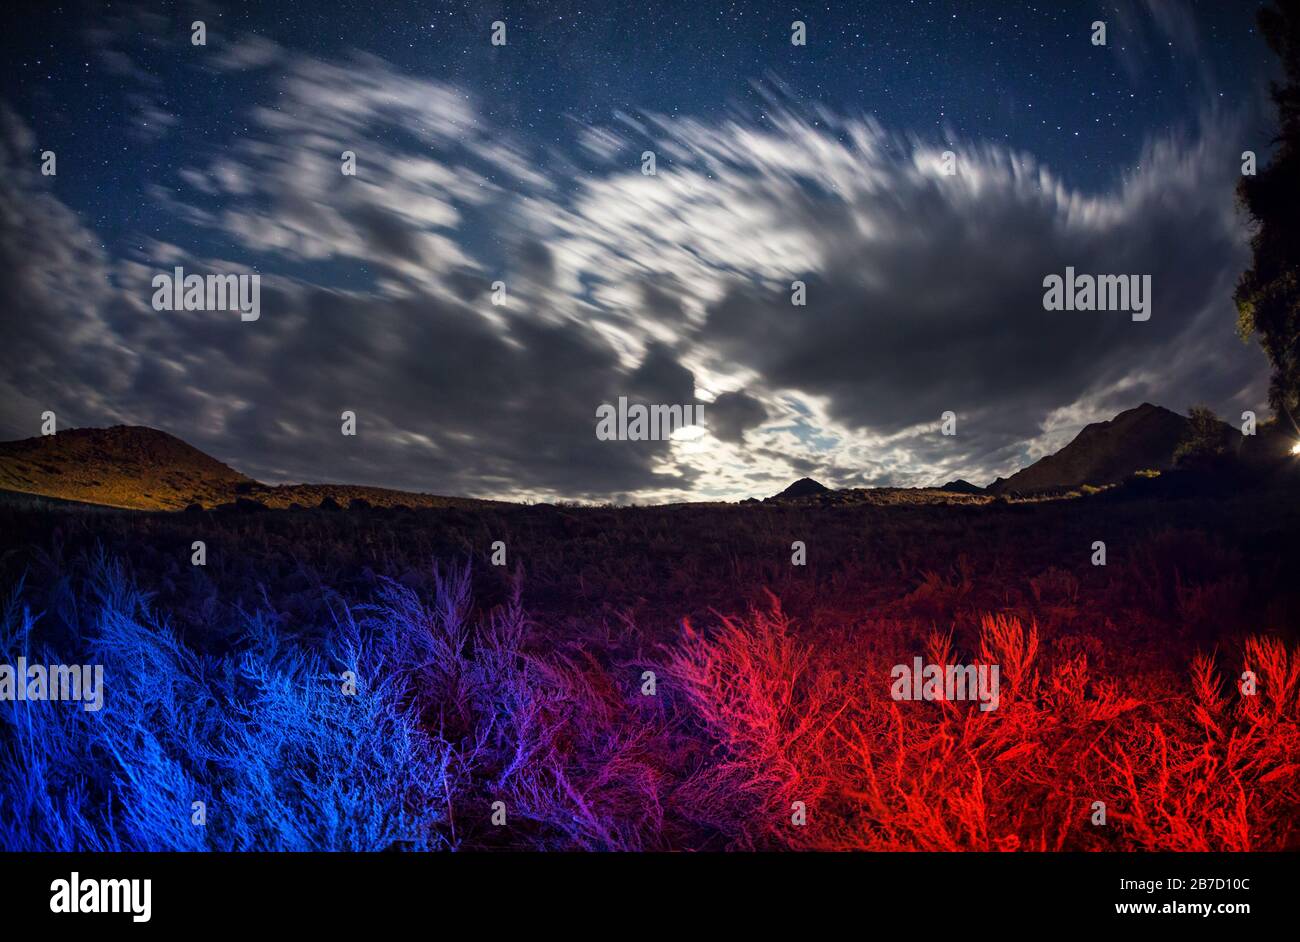 Surreal landscape of night starry sky and field with blue and red color grass Stock Photo